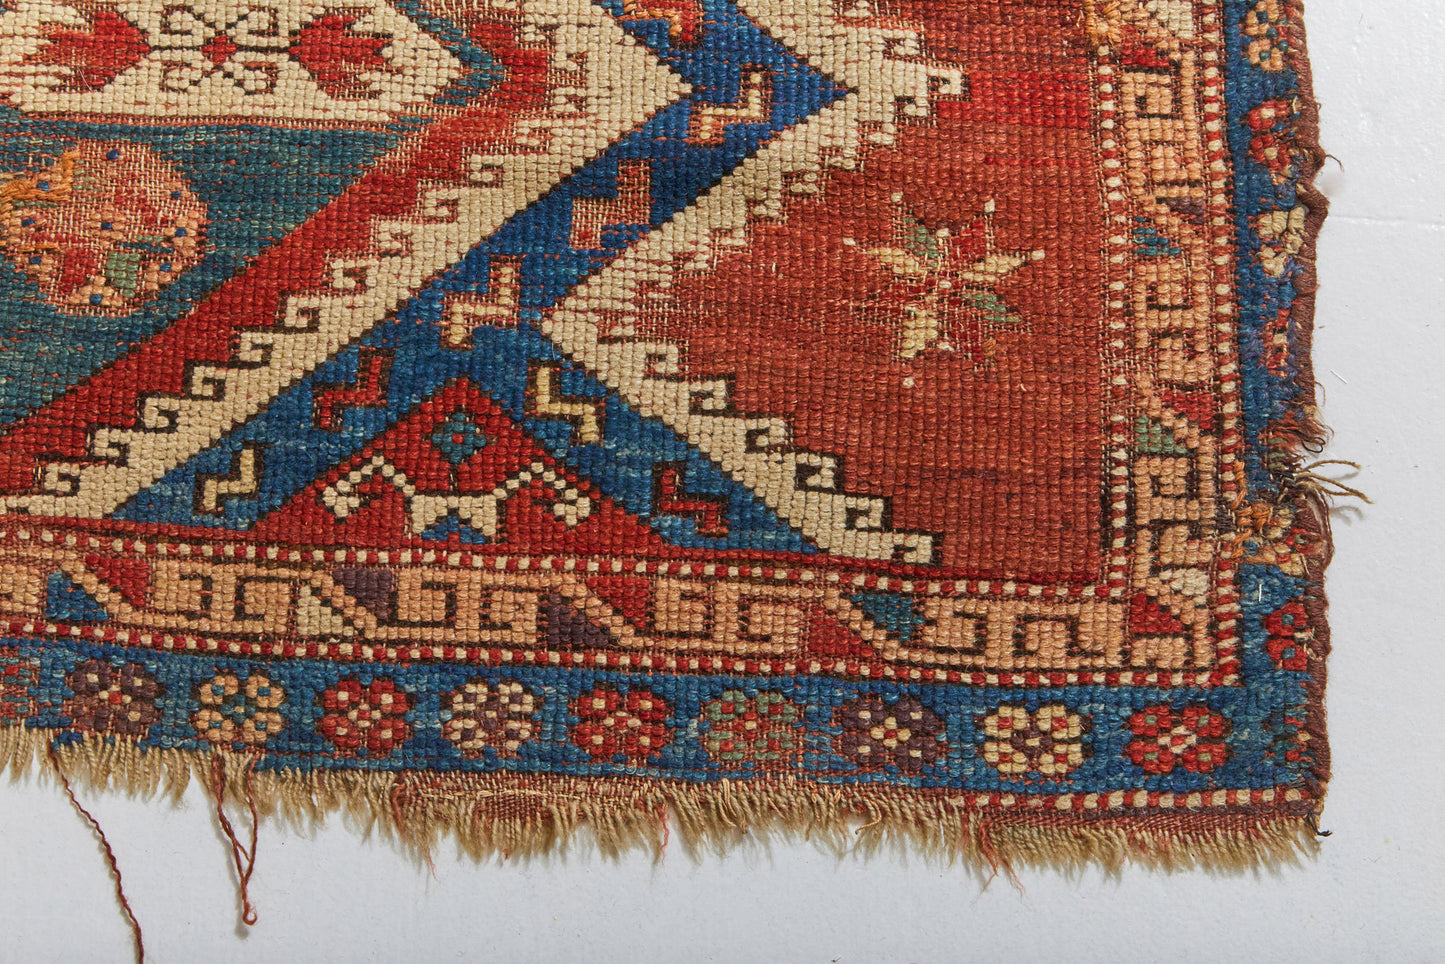 Antique hand woven Persian Rug, Caucasian Rug - Red, cream and blue weaving with crosses, medallions and zigzags available from King Kennedy Rugs Los Angeles